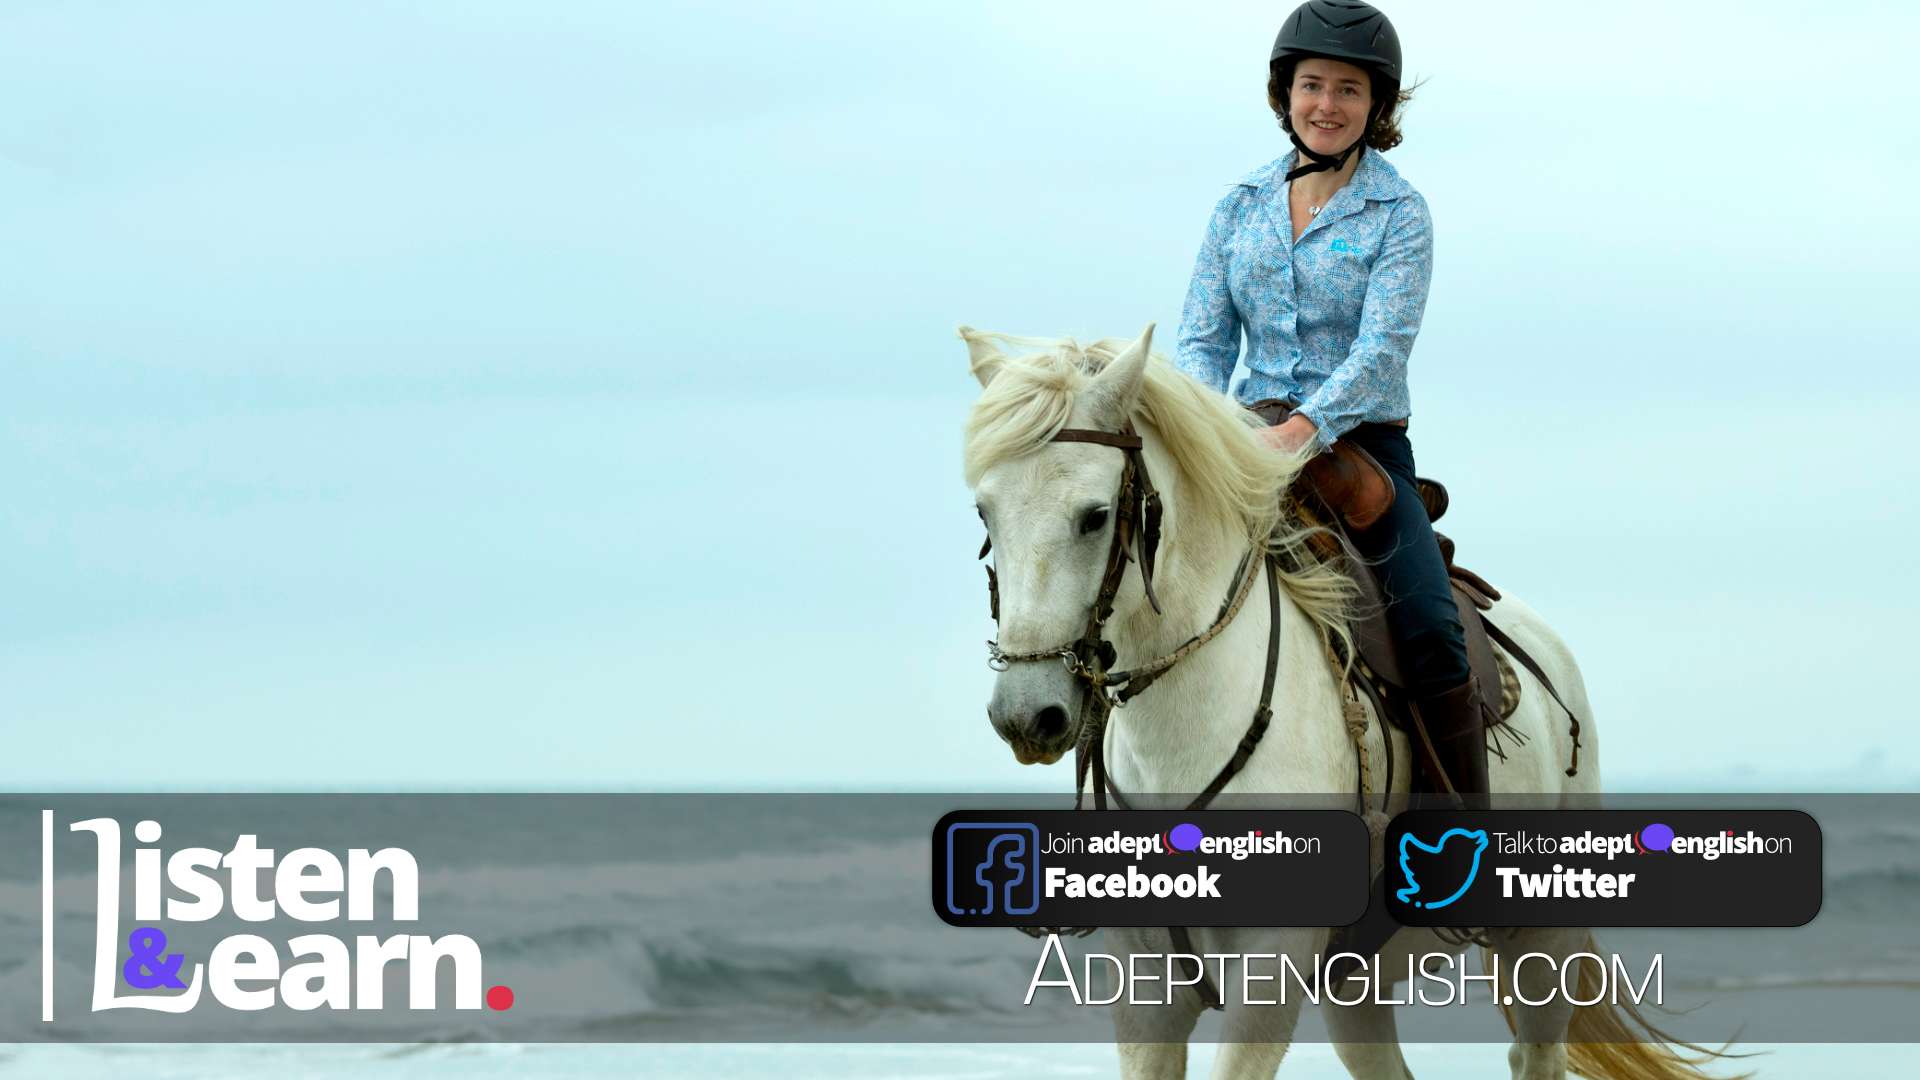 A photograph of a lady riding a white horse on sand at the beach. Used in an English language listening story to help students talk English.